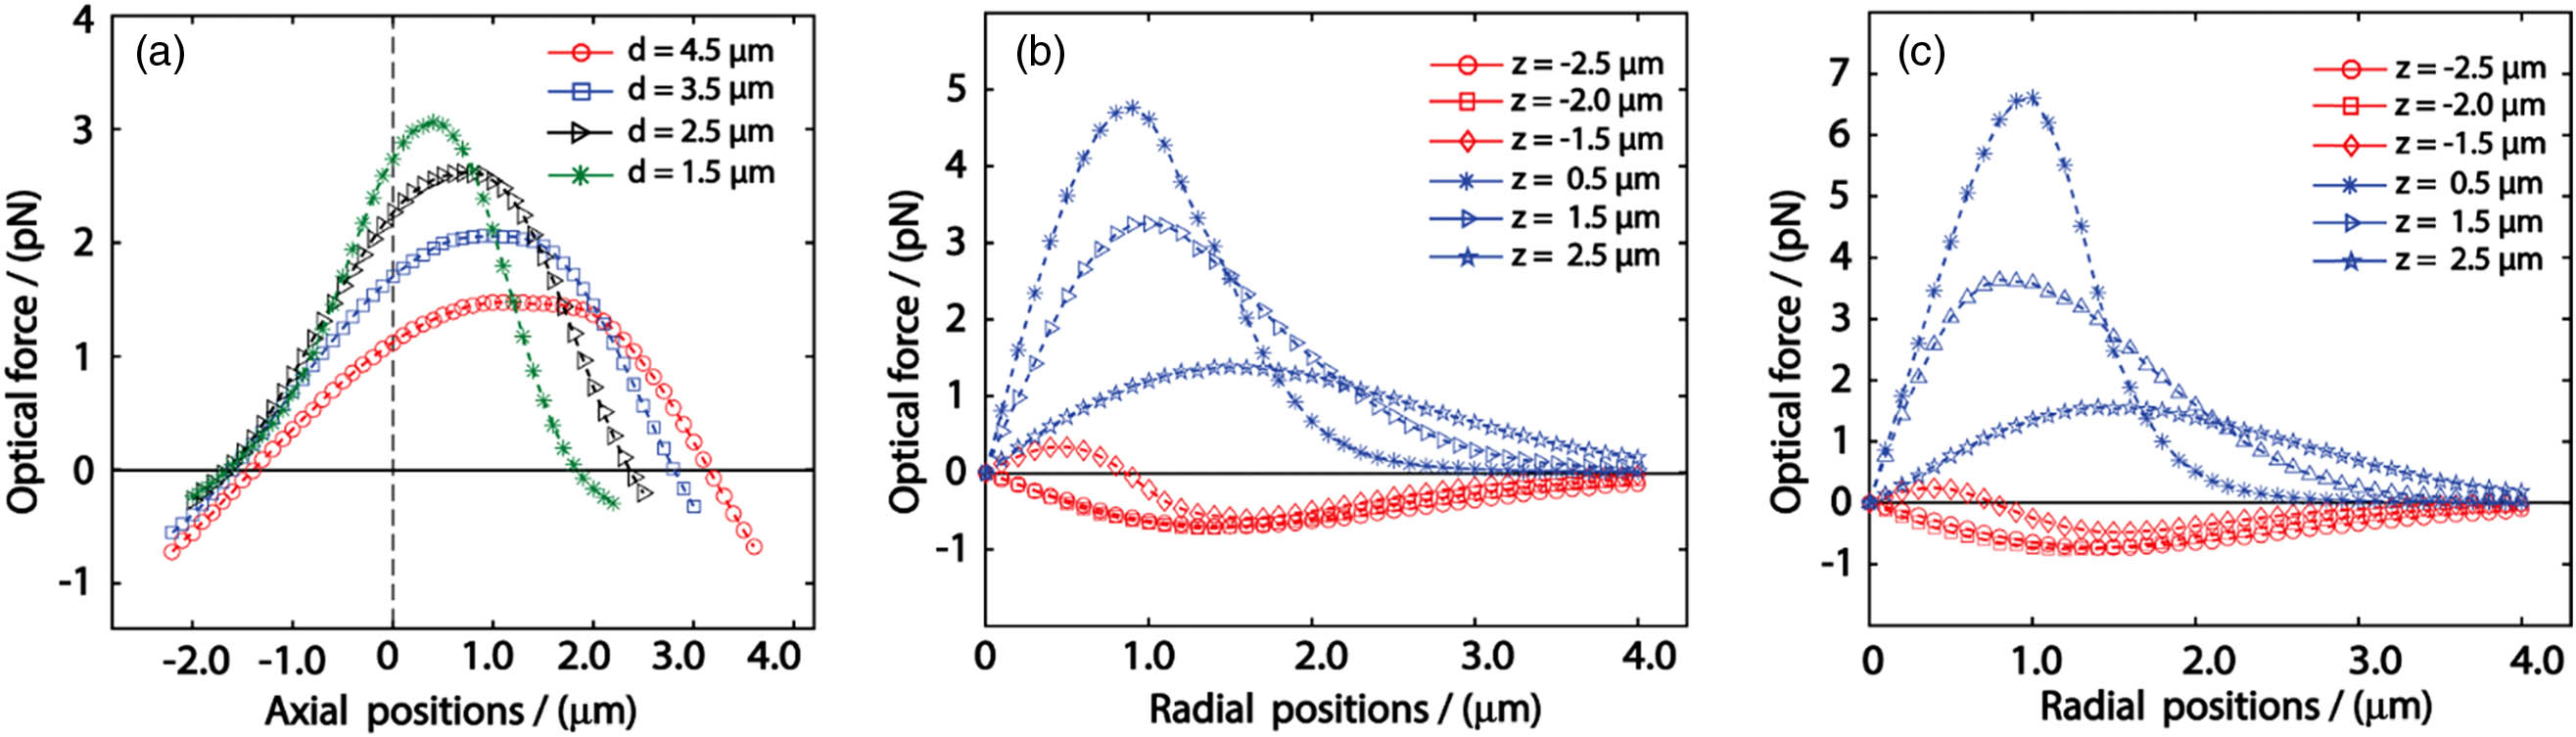 Forces exerted on gold particles. (a) Axial forces acting on particles of different radii at different points on the optical axis. The focus plane is at z=0. (b), (c) Transverse components of the optical force along the x and y axes, respectively, for various planes along the z-axial direction. Balance (F=0) is achieved at the crossing point of a curve with the abscissa. The gold particle diameter is 2.5 μm in (b) and (c); the 532 nm laser beam is x-directional polarized with a trapping power of 20 mW, in accordance with experimental conditions.